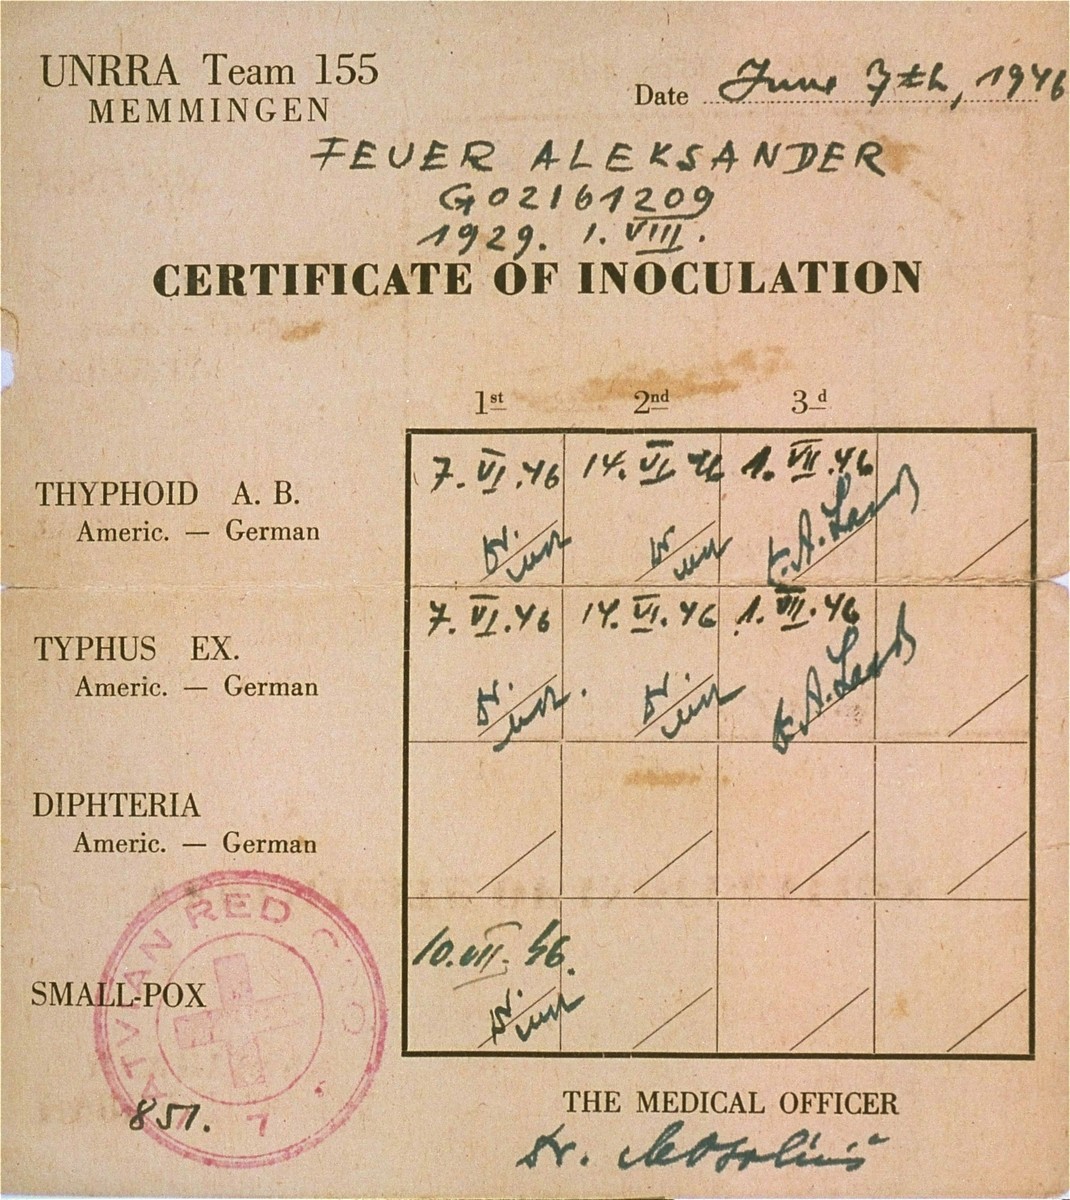 A document issued by the medical officer of UNRRA Team 155, Memmingen certifying that the donor, Alexander Feuer, has received the necessary innoculations.